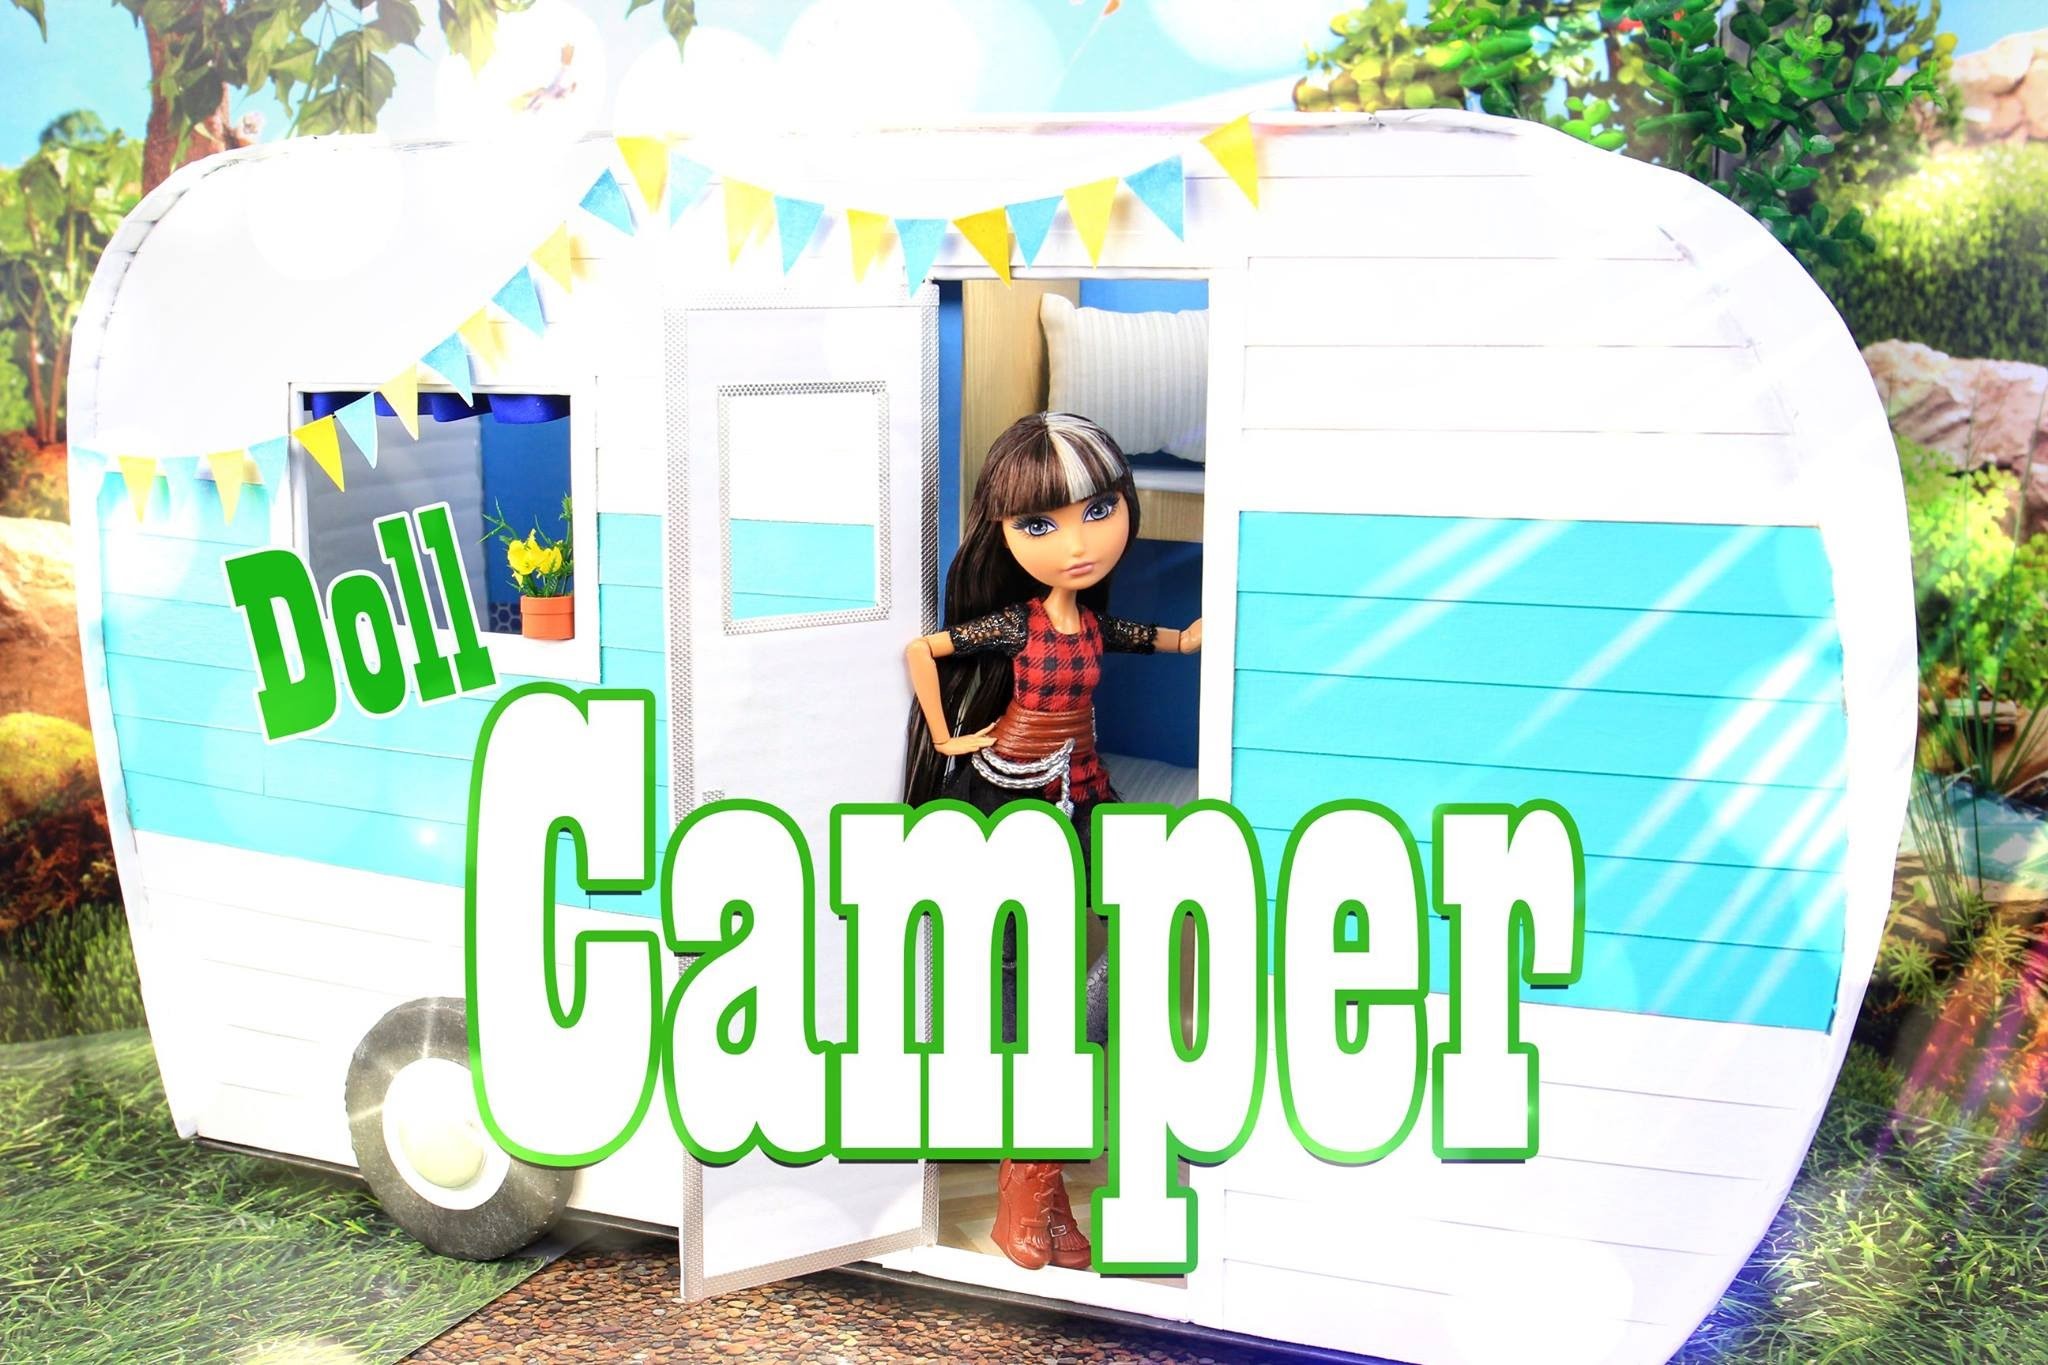 How to Make a Doll Camper - EXTREME Doll Crafts